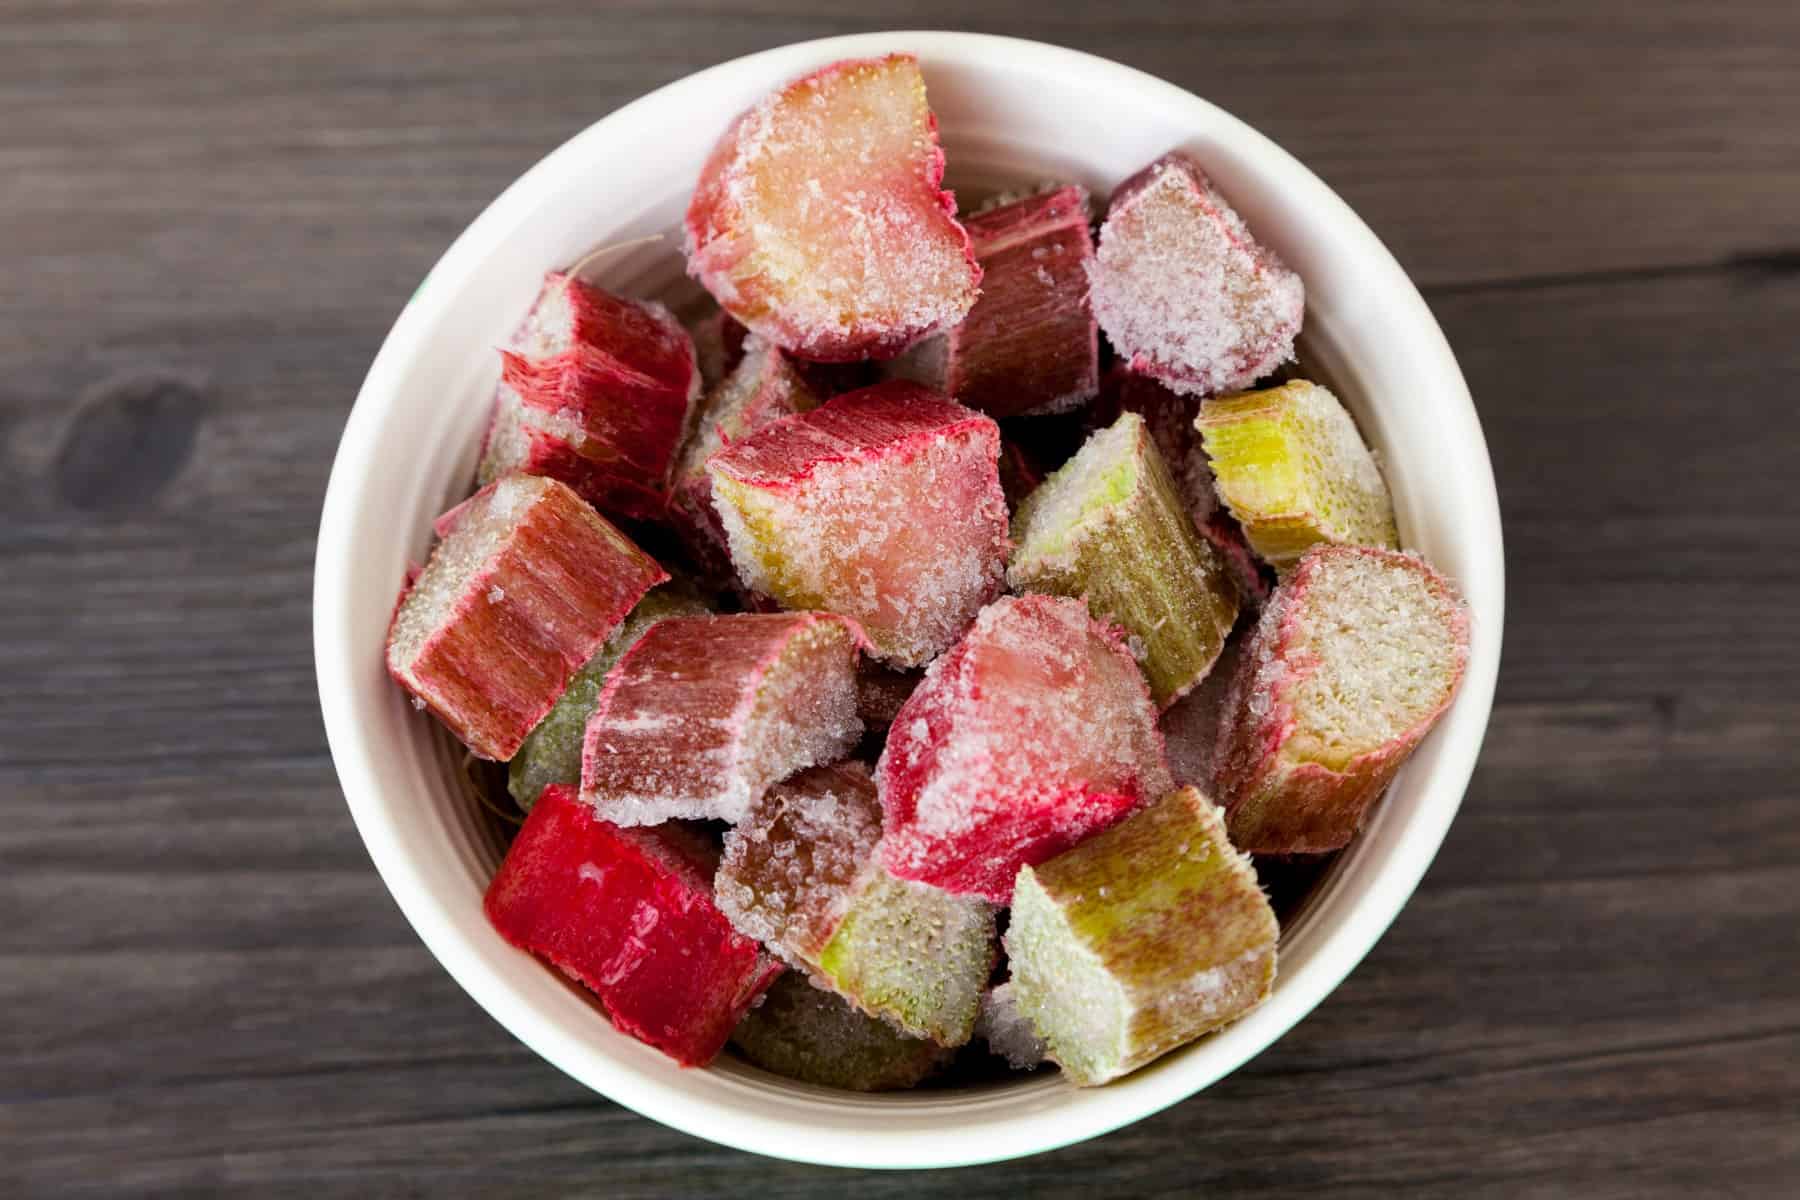 Frozen chunks of rhubarb in a bowl - top down view